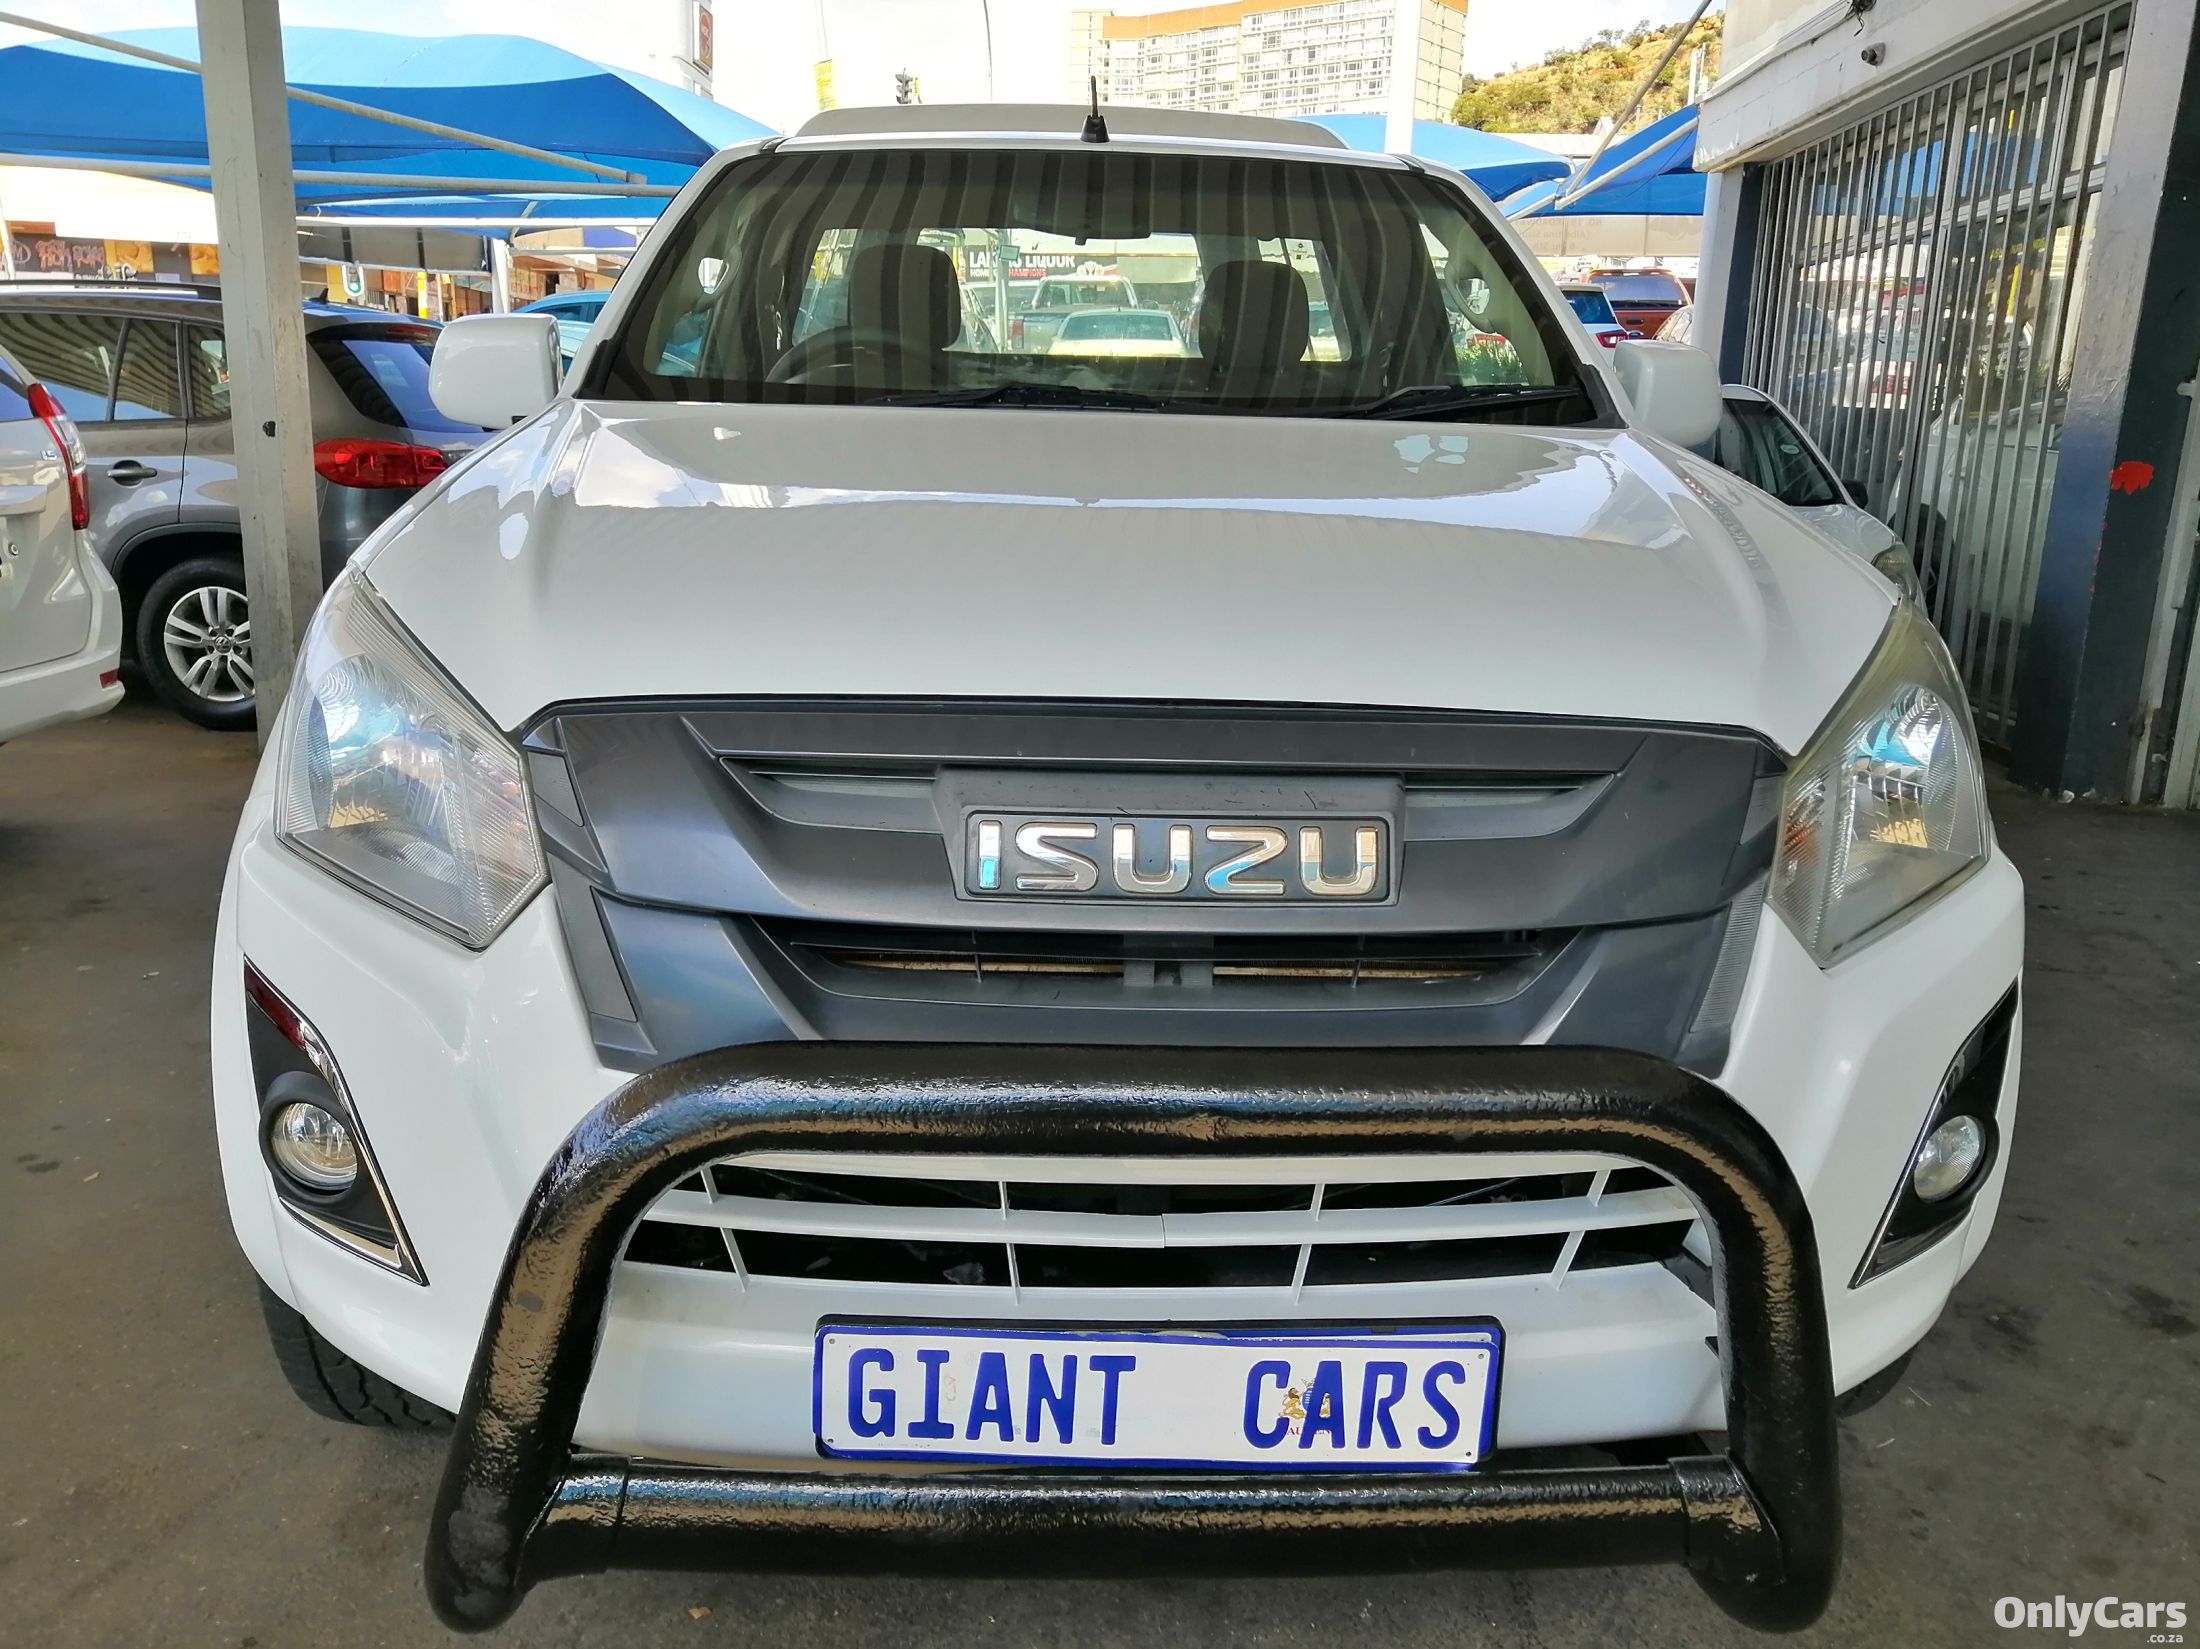 2019 Isuzu D-Max KB250 used car for sale in Johannesburg South Gauteng South Africa - OnlyCars.co.za